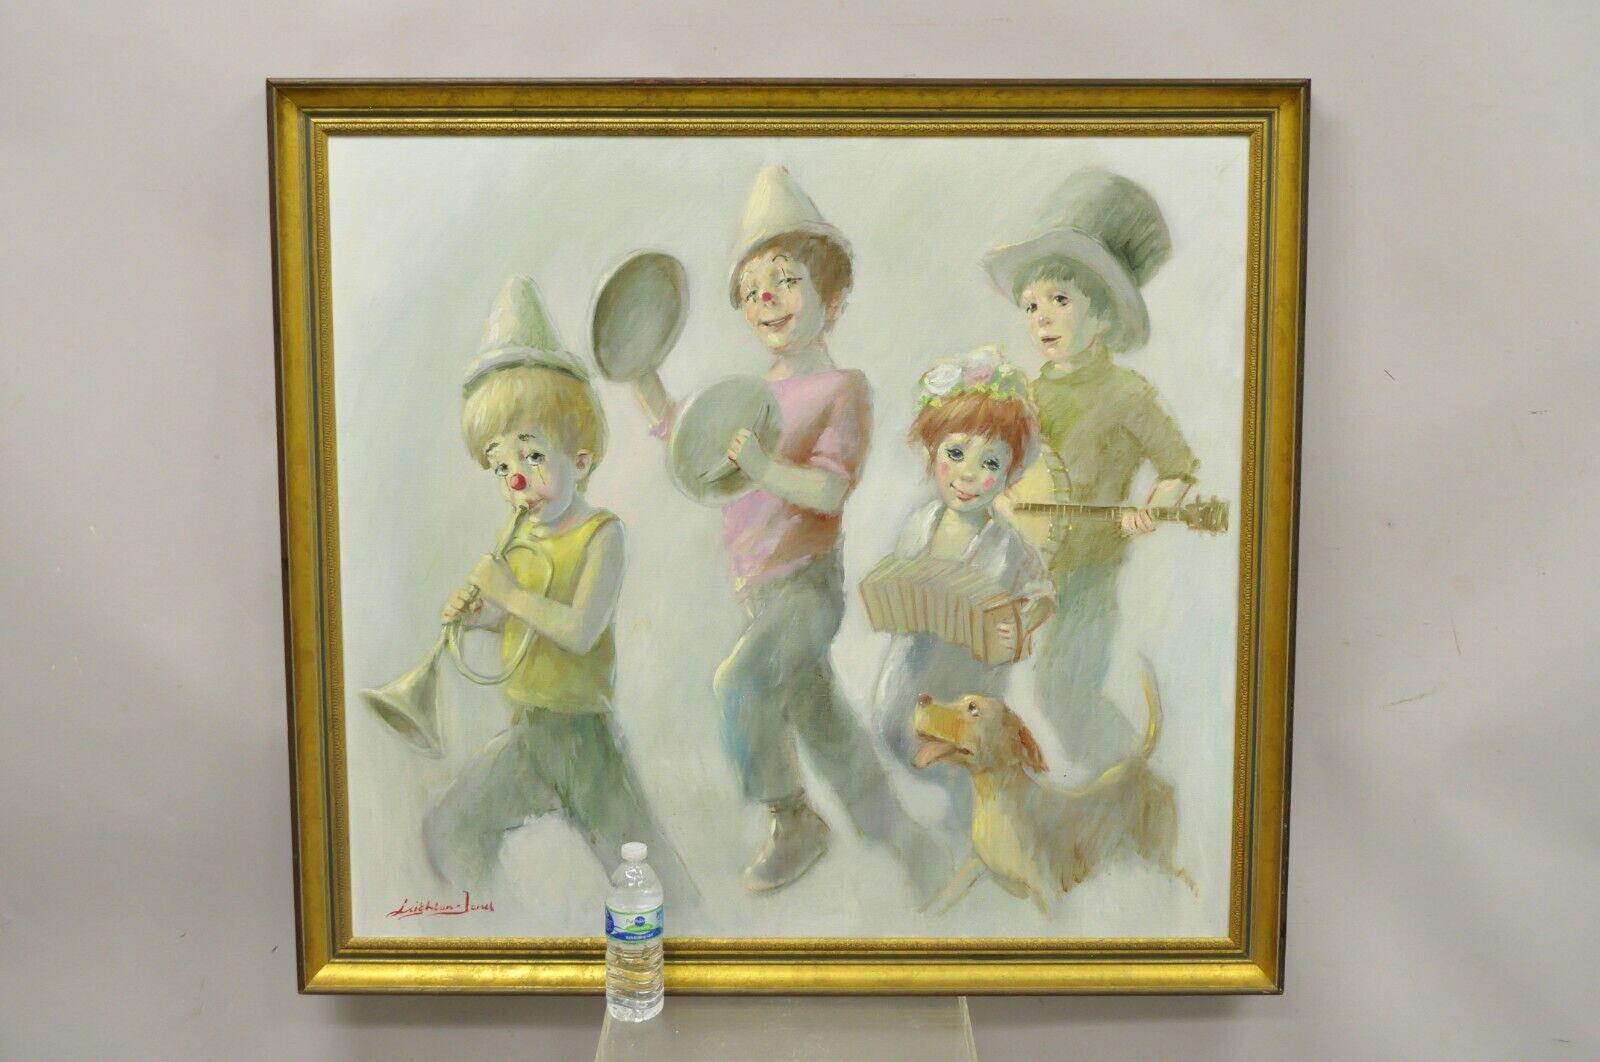 Barry Leighton Jones Large Oil on Canvas Painting Children Clown Parade and Dog, 